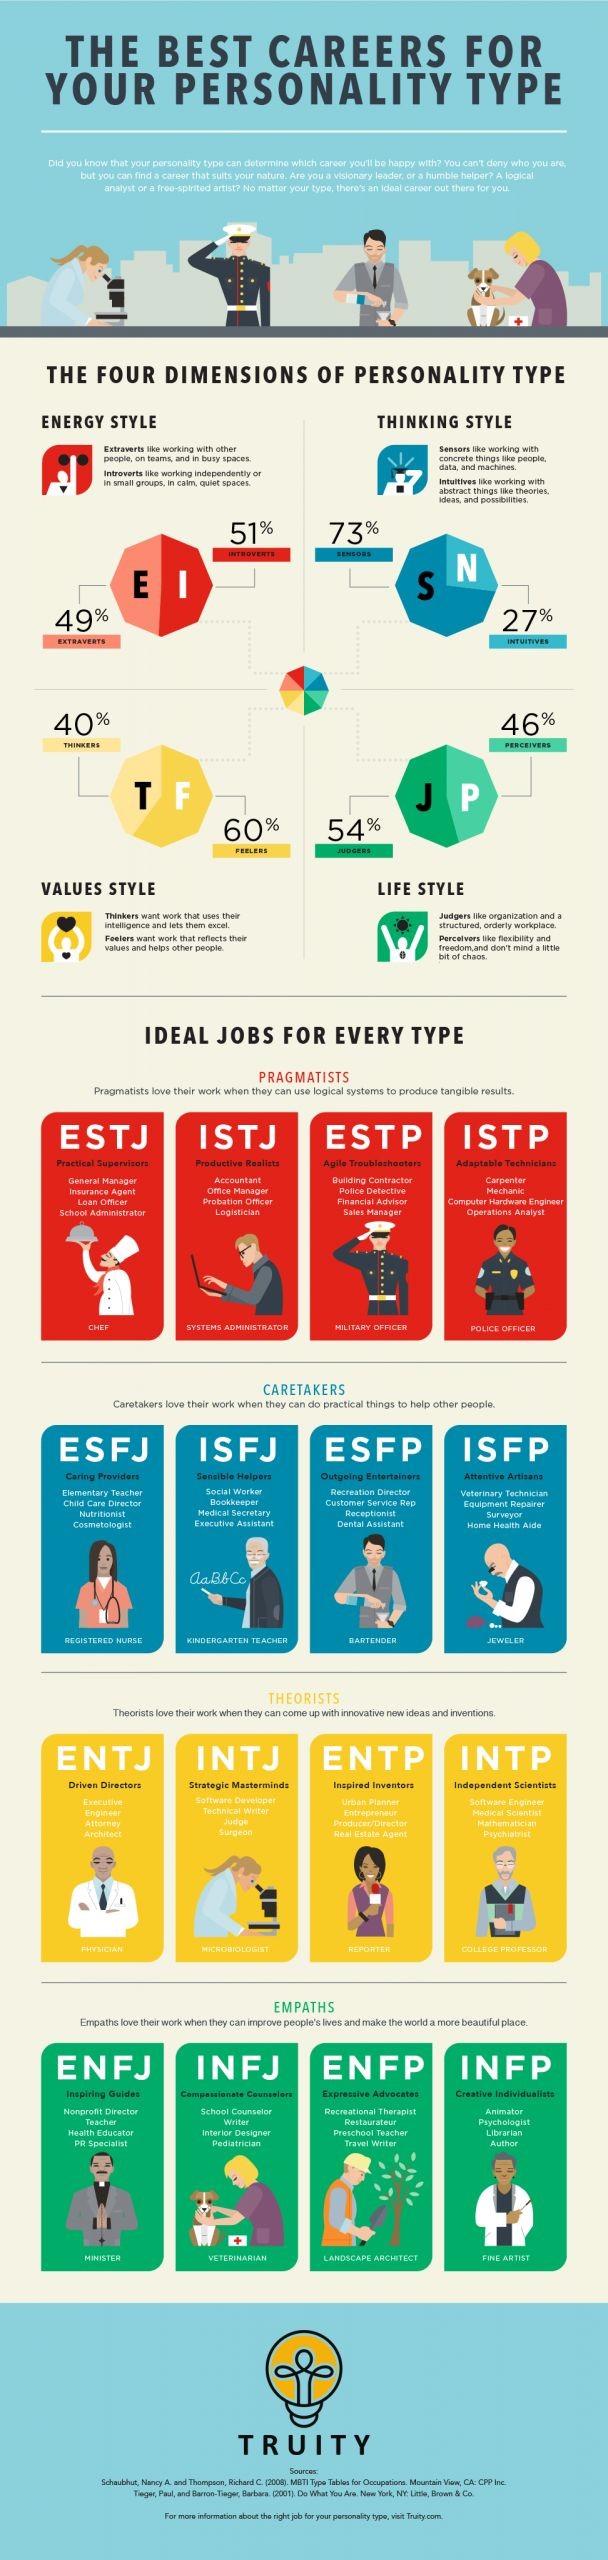 The Best Careers for Your Personality Type - very...